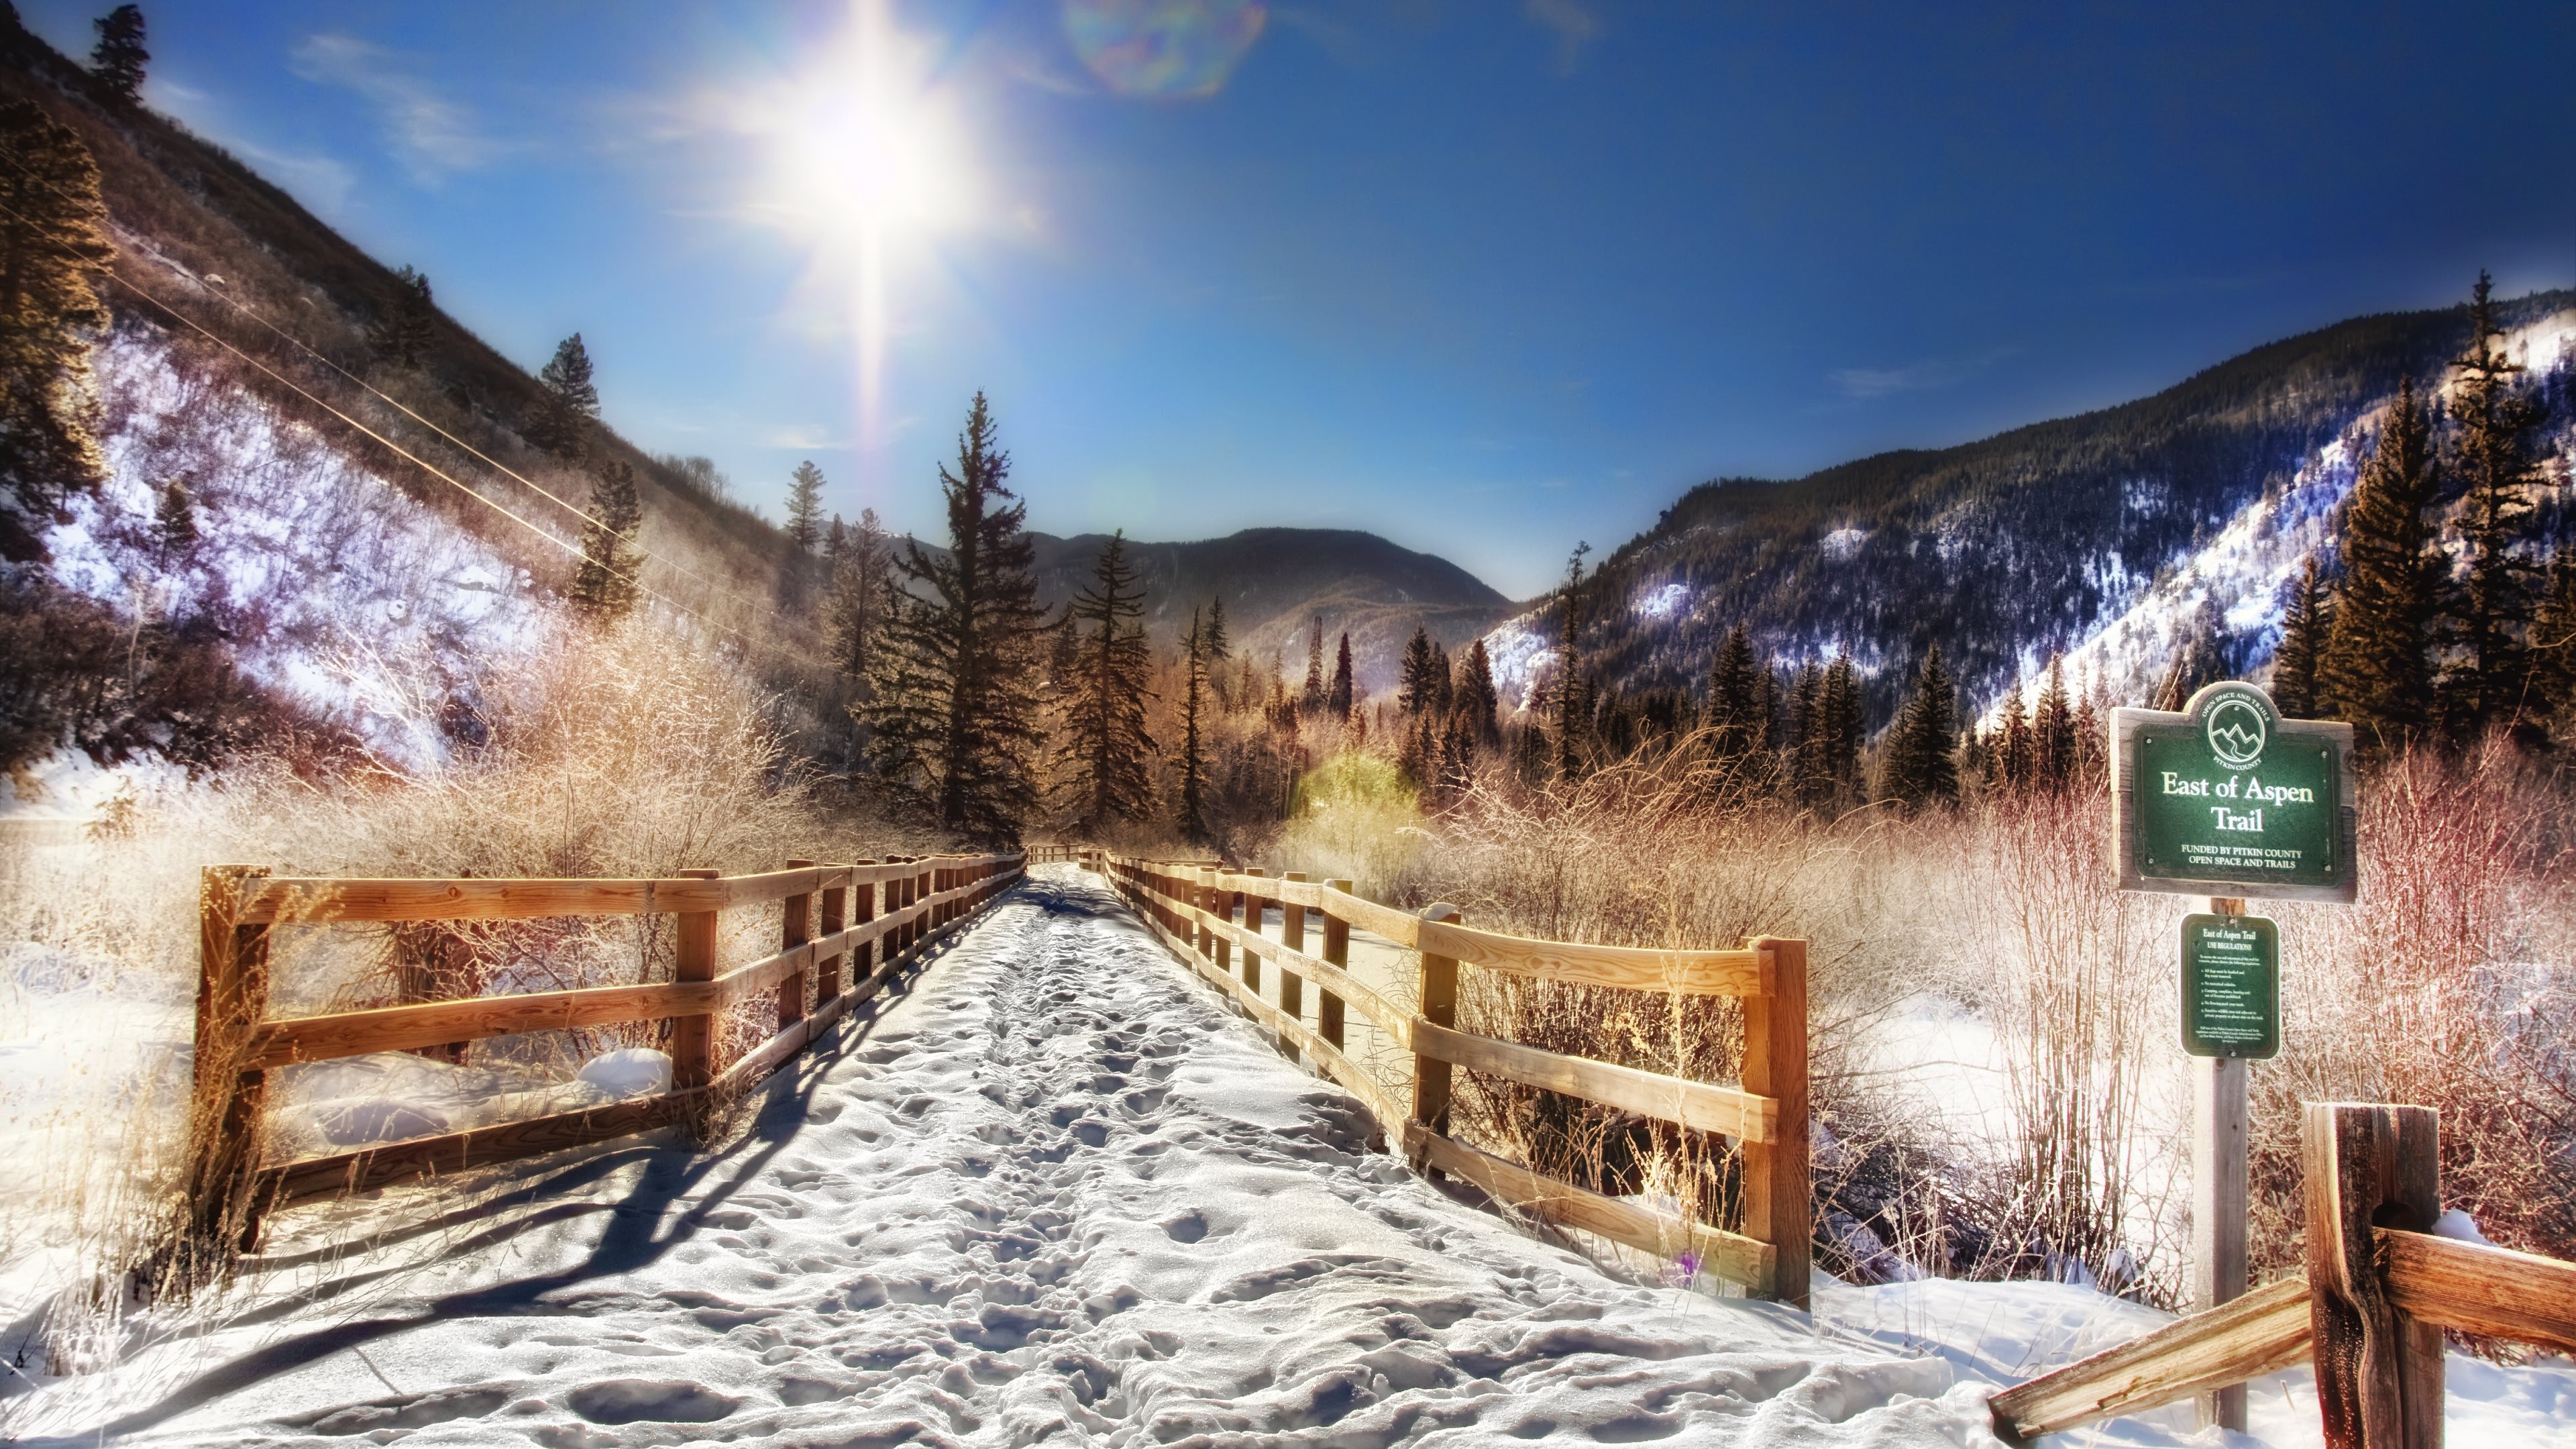 General 3840x2160 nature landscape Aspen snow trees forest sunlight mountains fence Colorado signs USA winter